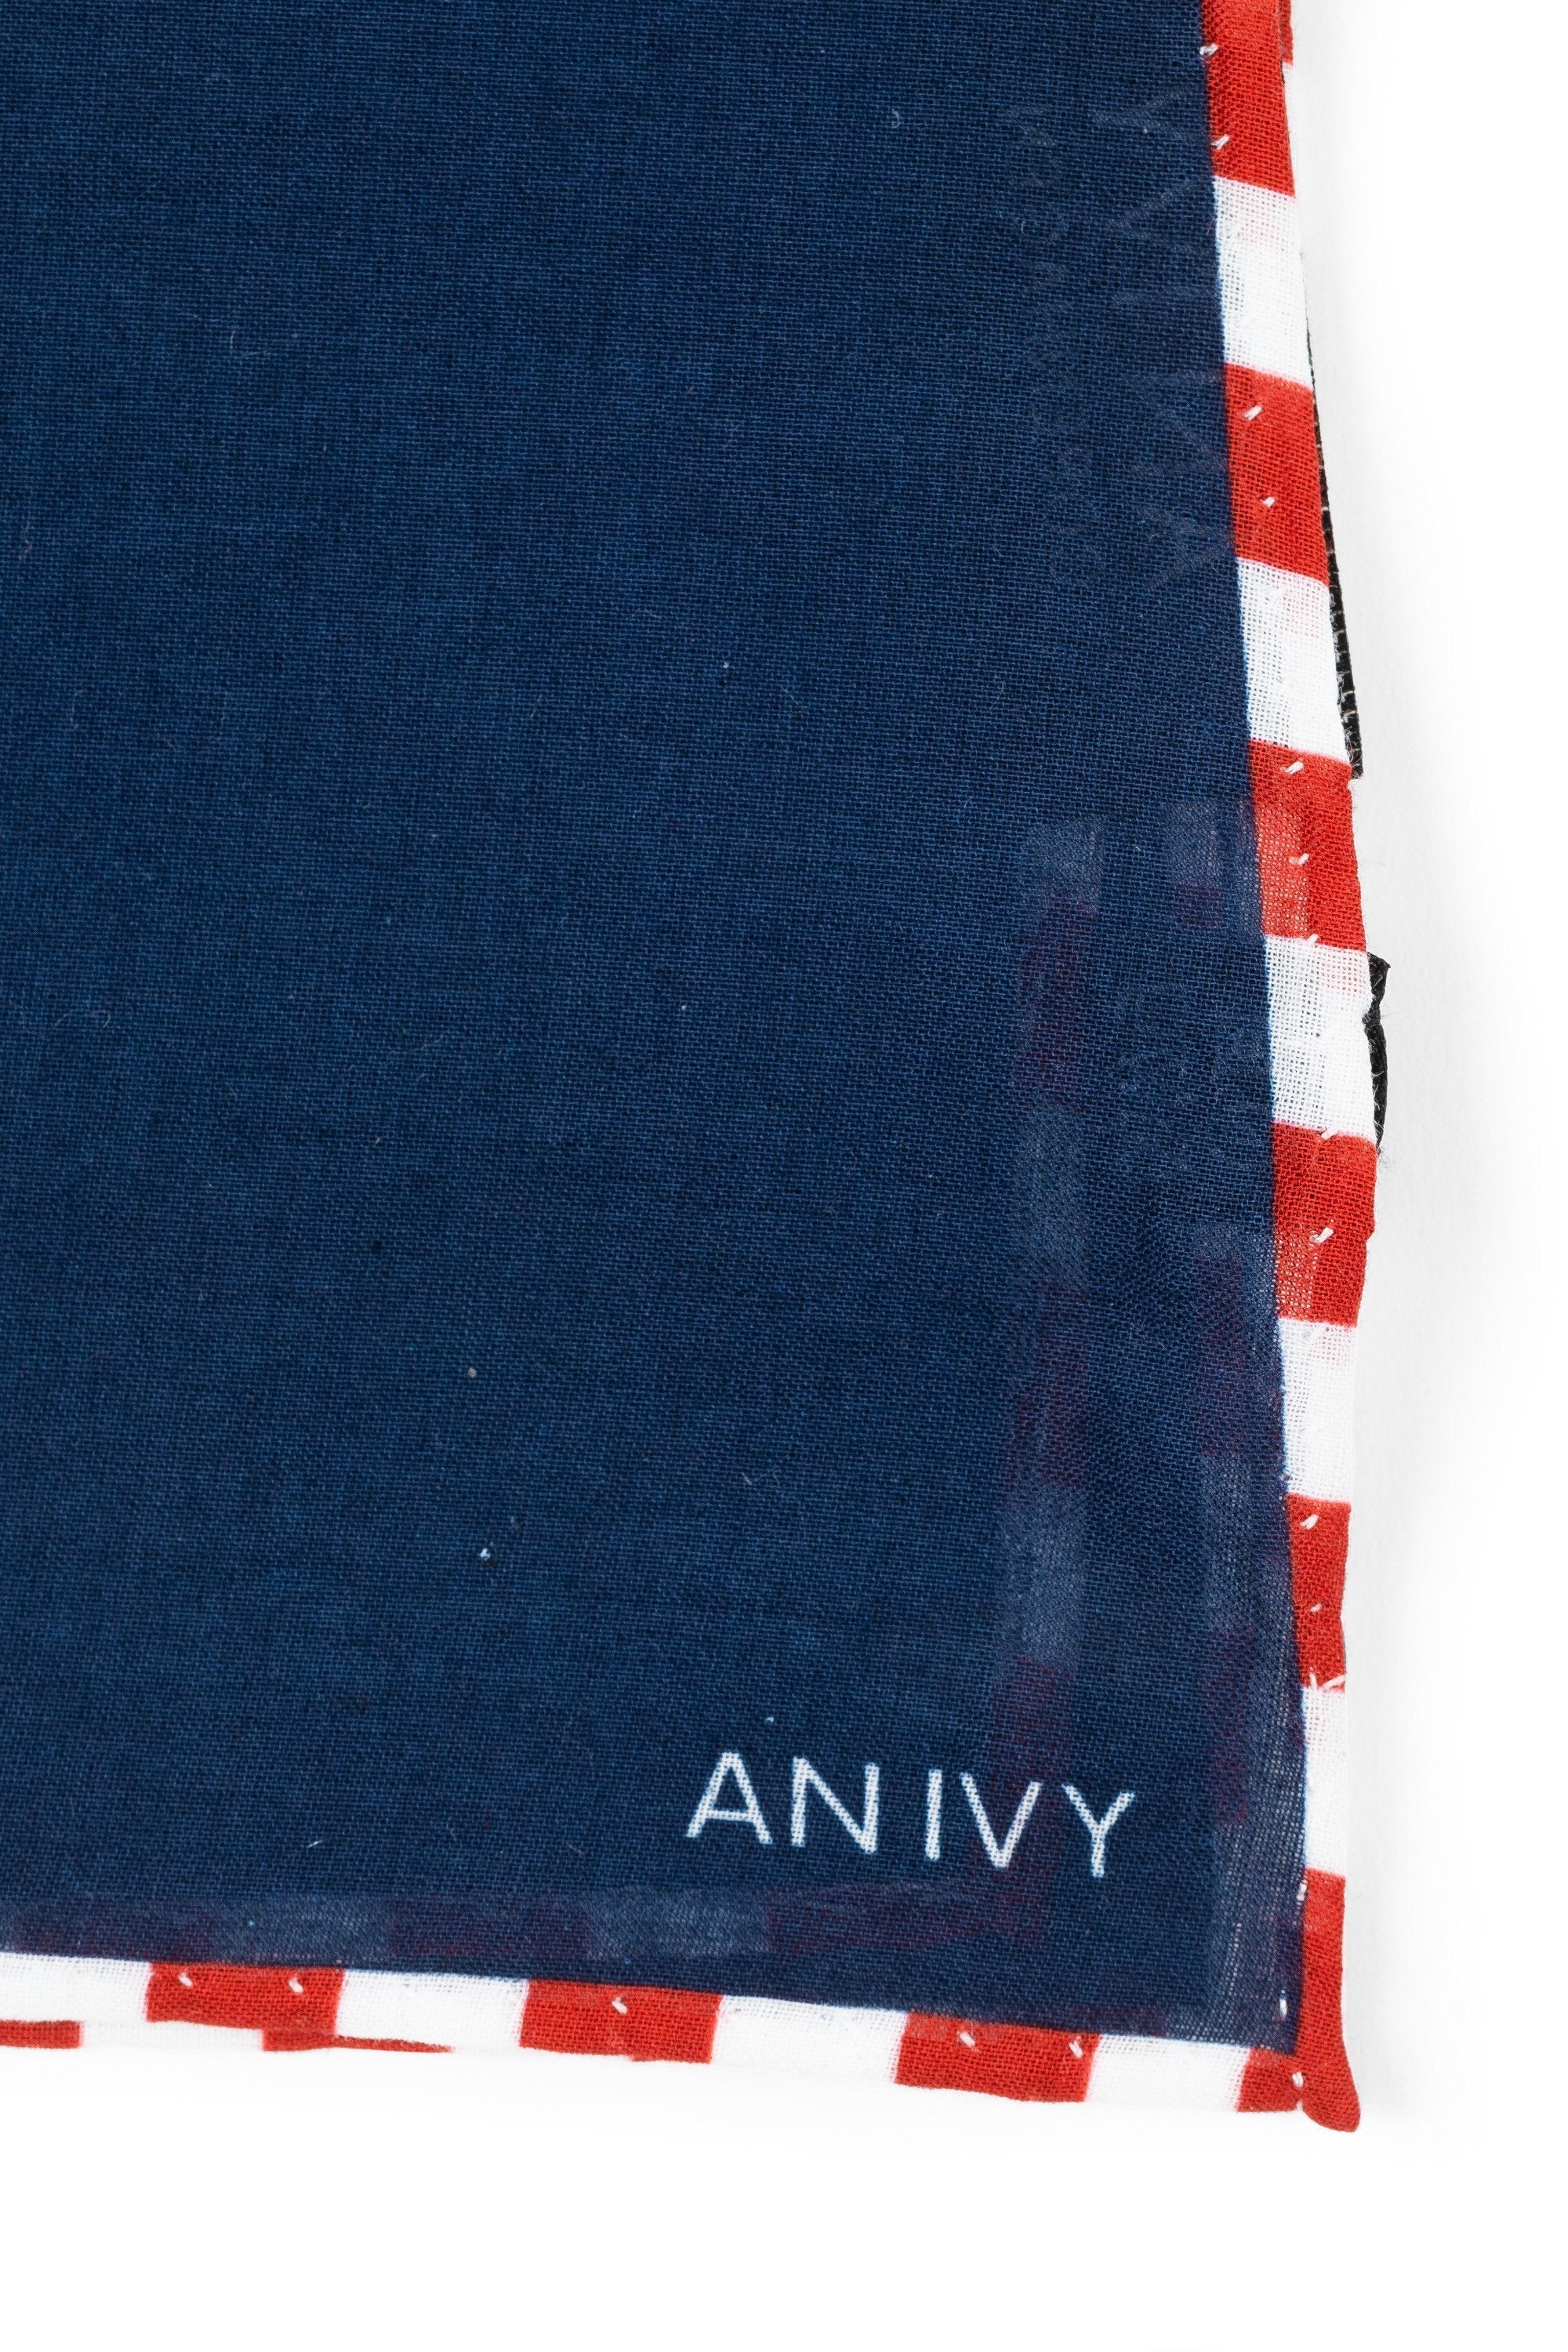 An ivy Pocket square Tricolore Borders Navy